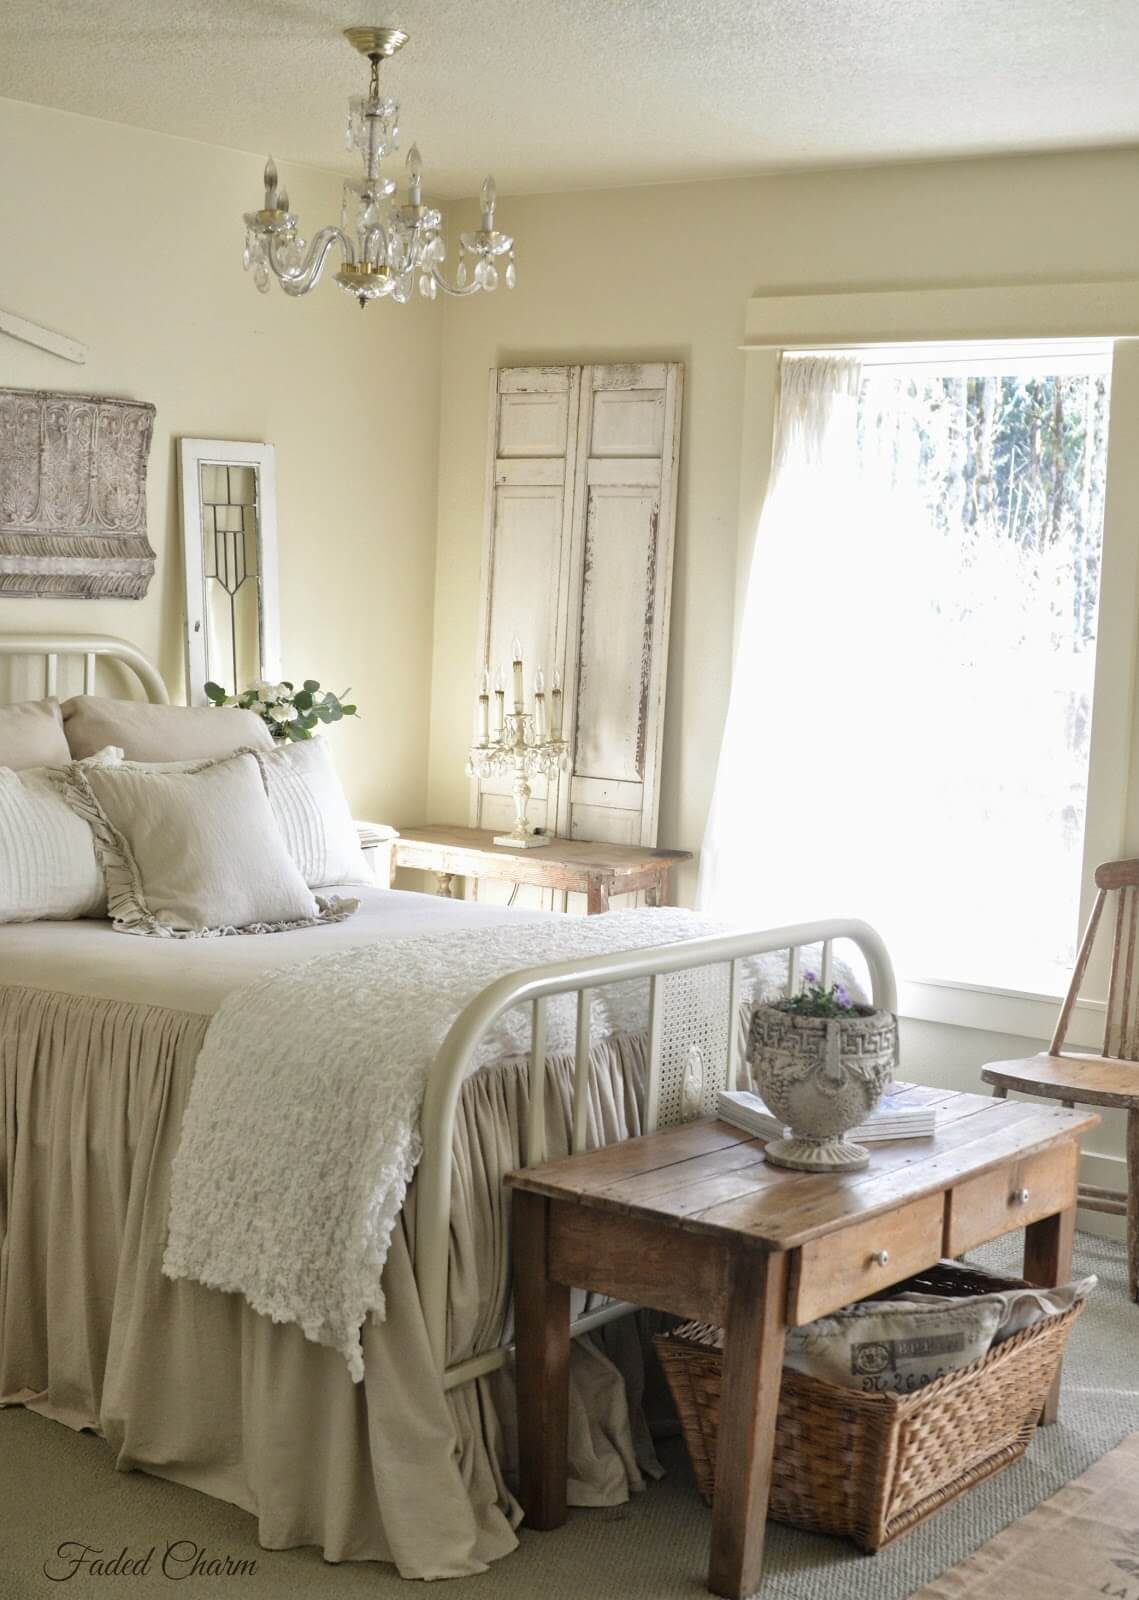 Charming Bedroom with Antique Bed Frame